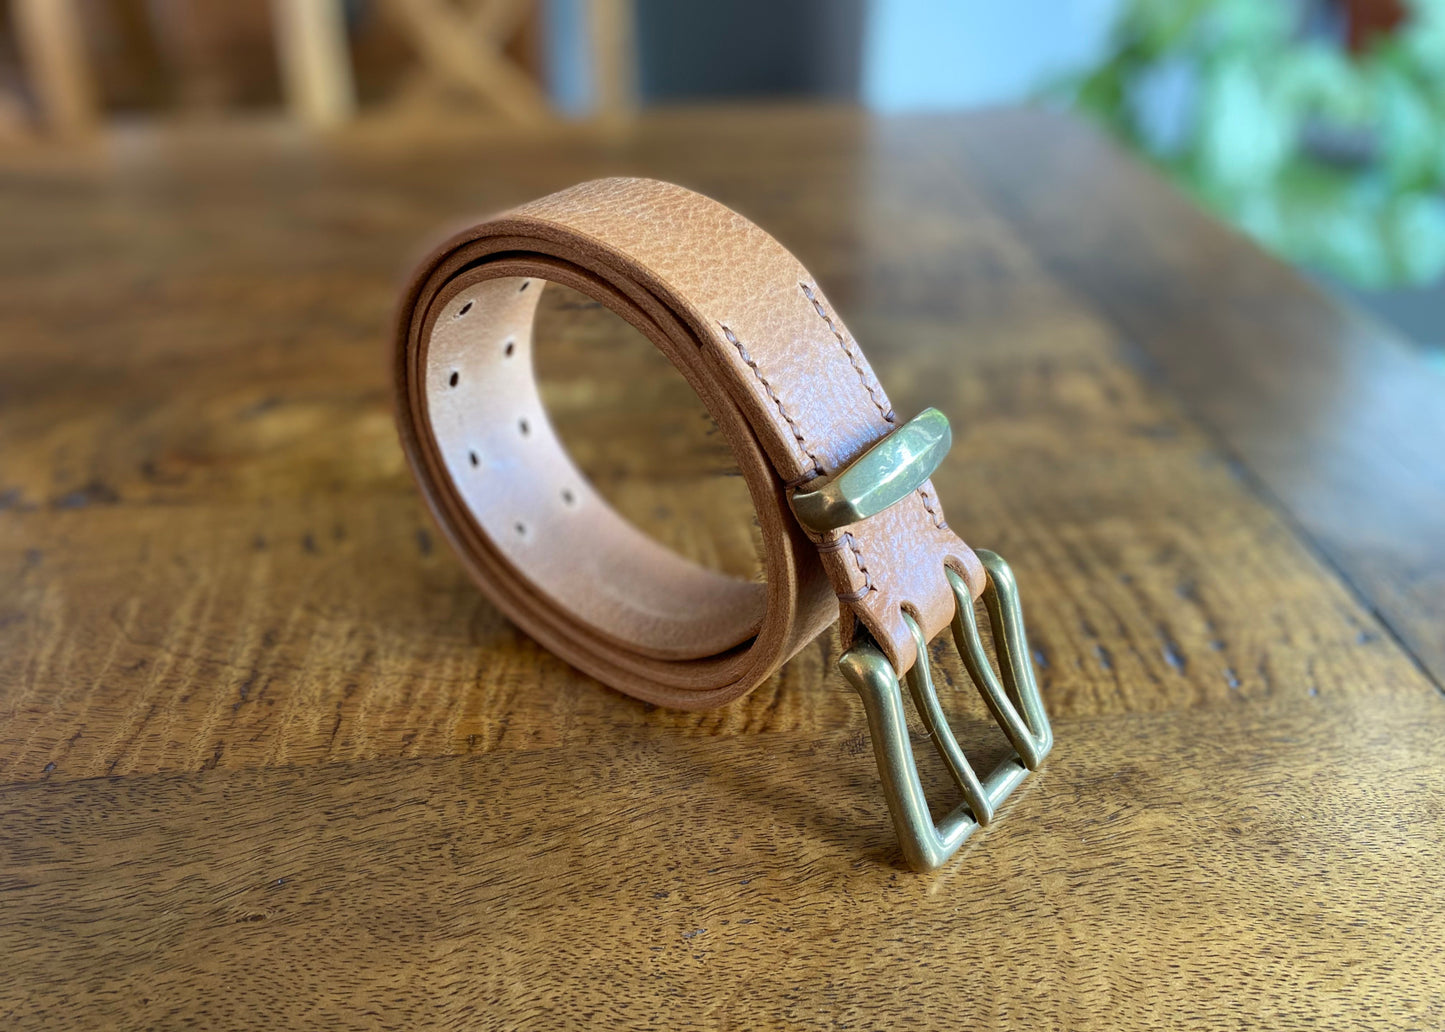 Tan Leather Belt - 2 prong Brass buckle - 1.5" (38mm wide) - Full Grain Leather - Hand Stitched